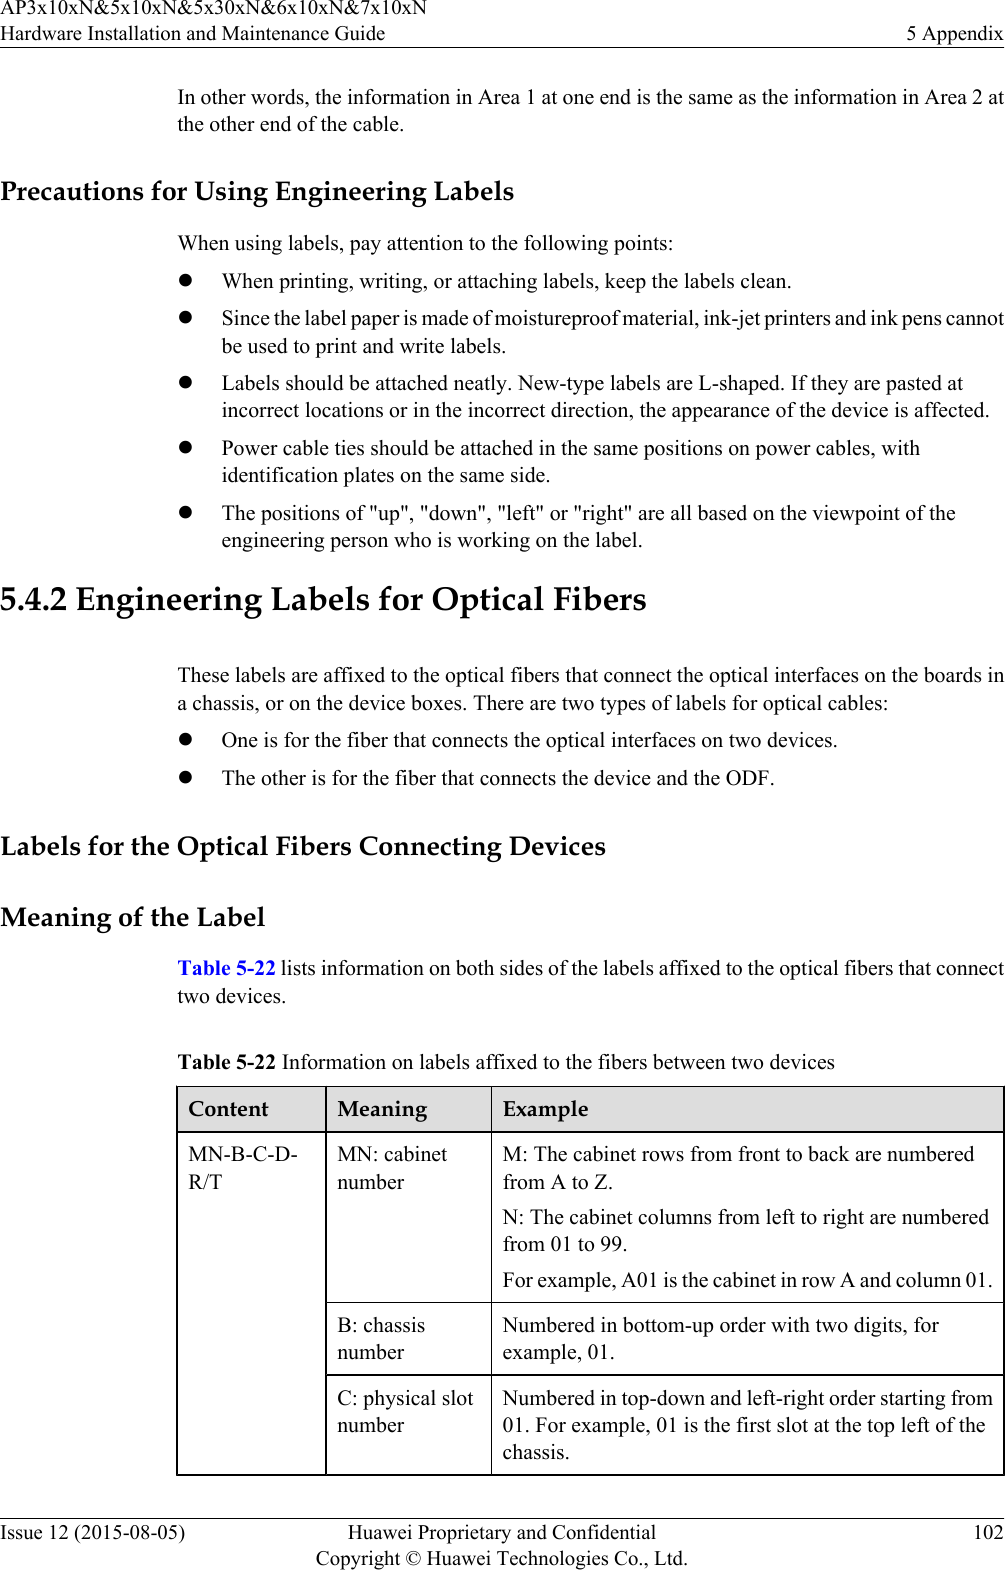 In other words, the information in Area 1 at one end is the same as the information in Area 2 atthe other end of the cable.Precautions for Using Engineering LabelsWhen using labels, pay attention to the following points:lWhen printing, writing, or attaching labels, keep the labels clean.lSince the label paper is made of moistureproof material, ink-jet printers and ink pens cannotbe used to print and write labels.lLabels should be attached neatly. New-type labels are L-shaped. If they are pasted atincorrect locations or in the incorrect direction, the appearance of the device is affected.lPower cable ties should be attached in the same positions on power cables, withidentification plates on the same side.lThe positions of &quot;up&quot;, &quot;down&quot;, &quot;left&quot; or &quot;right&quot; are all based on the viewpoint of theengineering person who is working on the label.5.4.2 Engineering Labels for Optical FibersThese labels are affixed to the optical fibers that connect the optical interfaces on the boards ina chassis, or on the device boxes. There are two types of labels for optical cables:lOne is for the fiber that connects the optical interfaces on two devices.lThe other is for the fiber that connects the device and the ODF.Labels for the Optical Fibers Connecting DevicesMeaning of the LabelTable 5-22 lists information on both sides of the labels affixed to the optical fibers that connecttwo devices.Table 5-22 Information on labels affixed to the fibers between two devicesContent Meaning ExampleMN-B-C-D-R/TMN: cabinetnumberM: The cabinet rows from front to back are numberedfrom A to Z.N: The cabinet columns from left to right are numberedfrom 01 to 99.For example, A01 is the cabinet in row A and column 01.B: chassisnumberNumbered in bottom-up order with two digits, forexample, 01.C: physical slotnumberNumbered in top-down and left-right order starting from01. For example, 01 is the first slot at the top left of thechassis.AP3x10xN&amp;5x10xN&amp;5x30xN&amp;6x10xN&amp;7x10xNHardware Installation and Maintenance Guide 5 AppendixIssue 12 (2015-08-05) Huawei Proprietary and ConfidentialCopyright © Huawei Technologies Co., Ltd.102